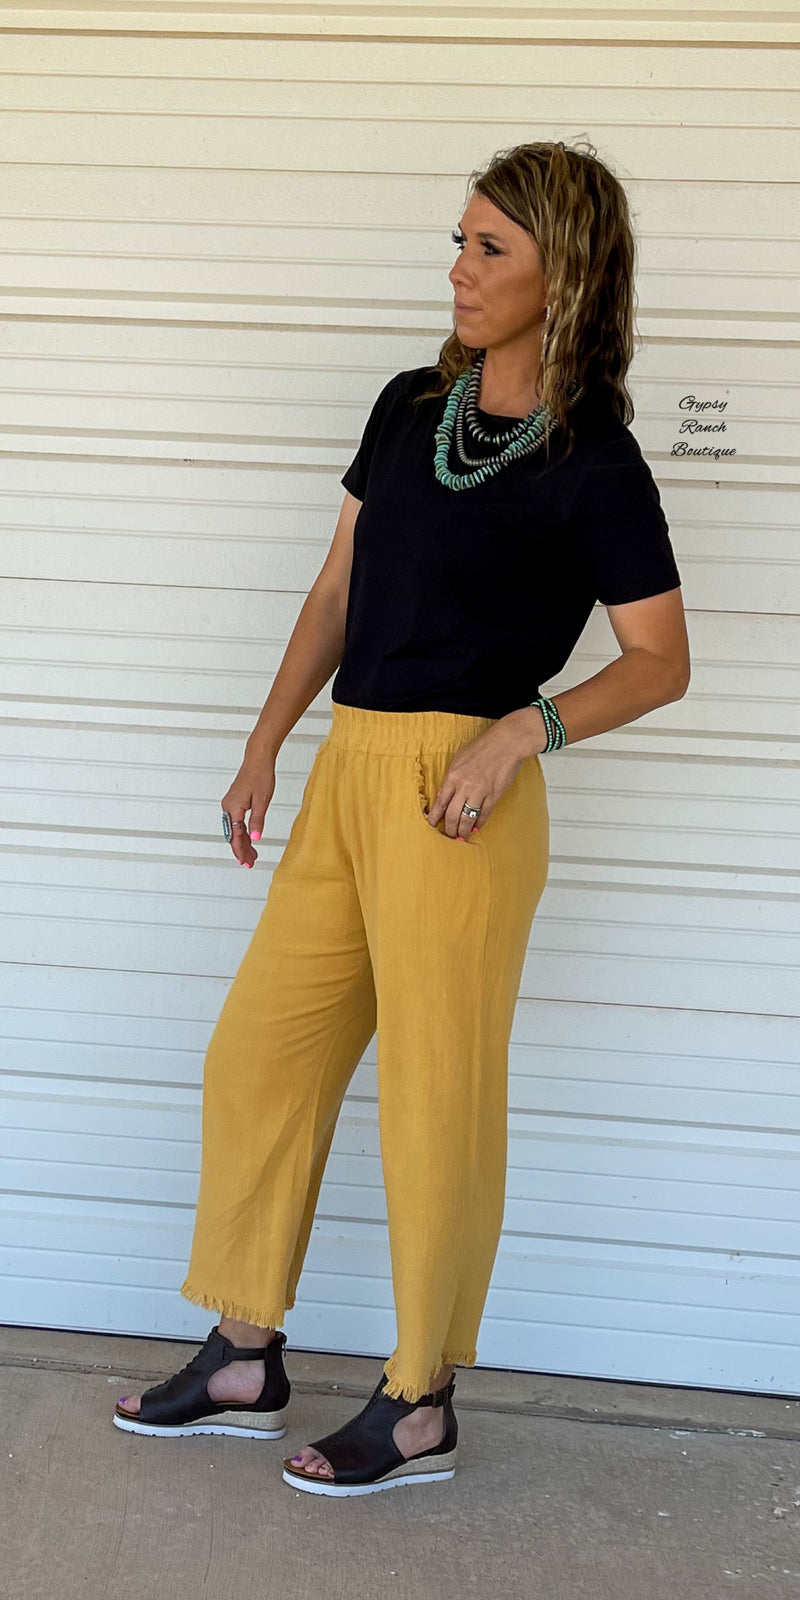 My Favorite Mustard Pants - Also in Plus Size